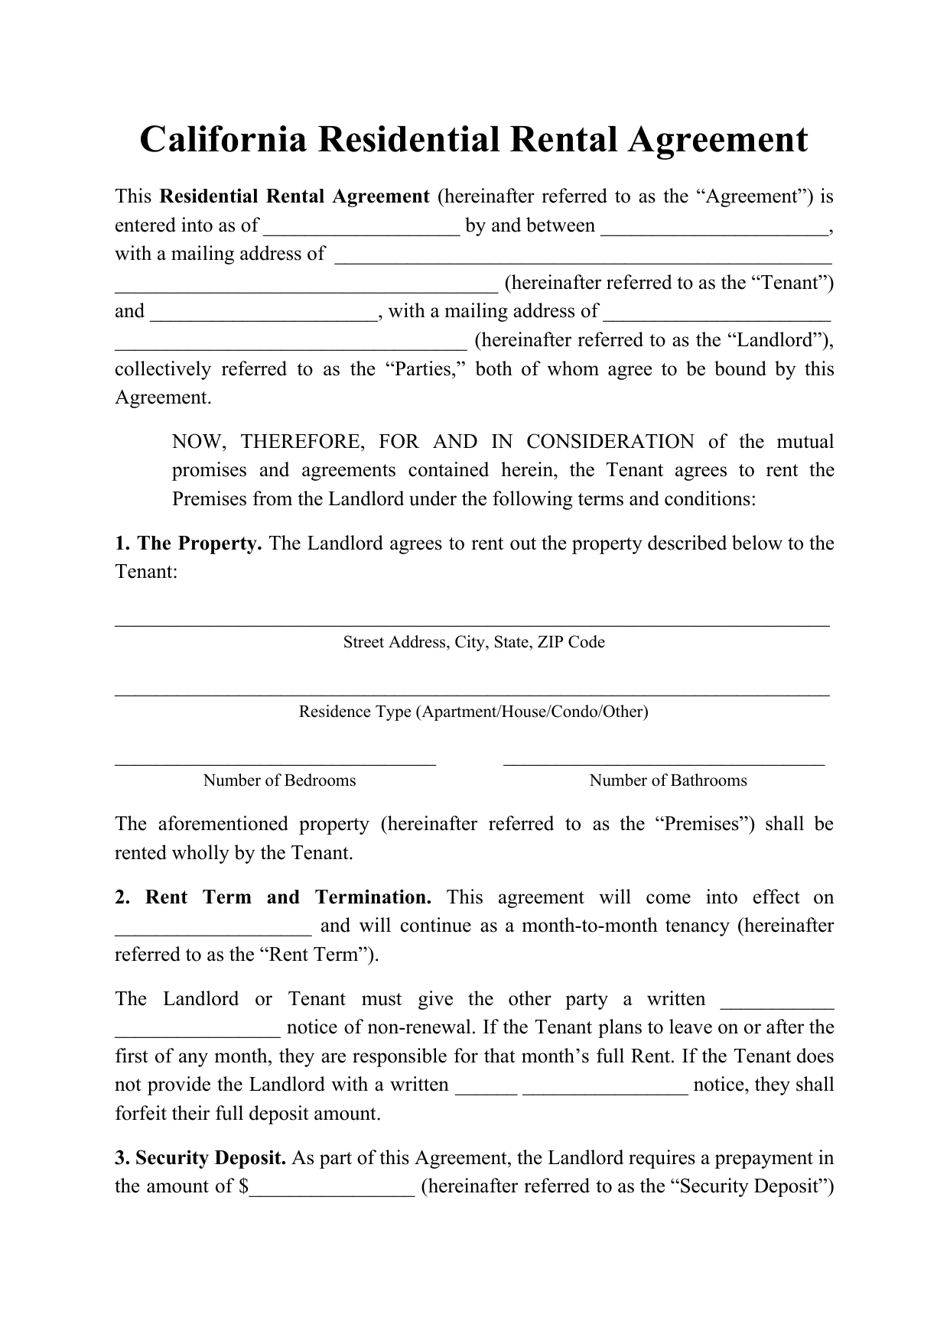 Residential Rental Agreement Template - California, Page 1